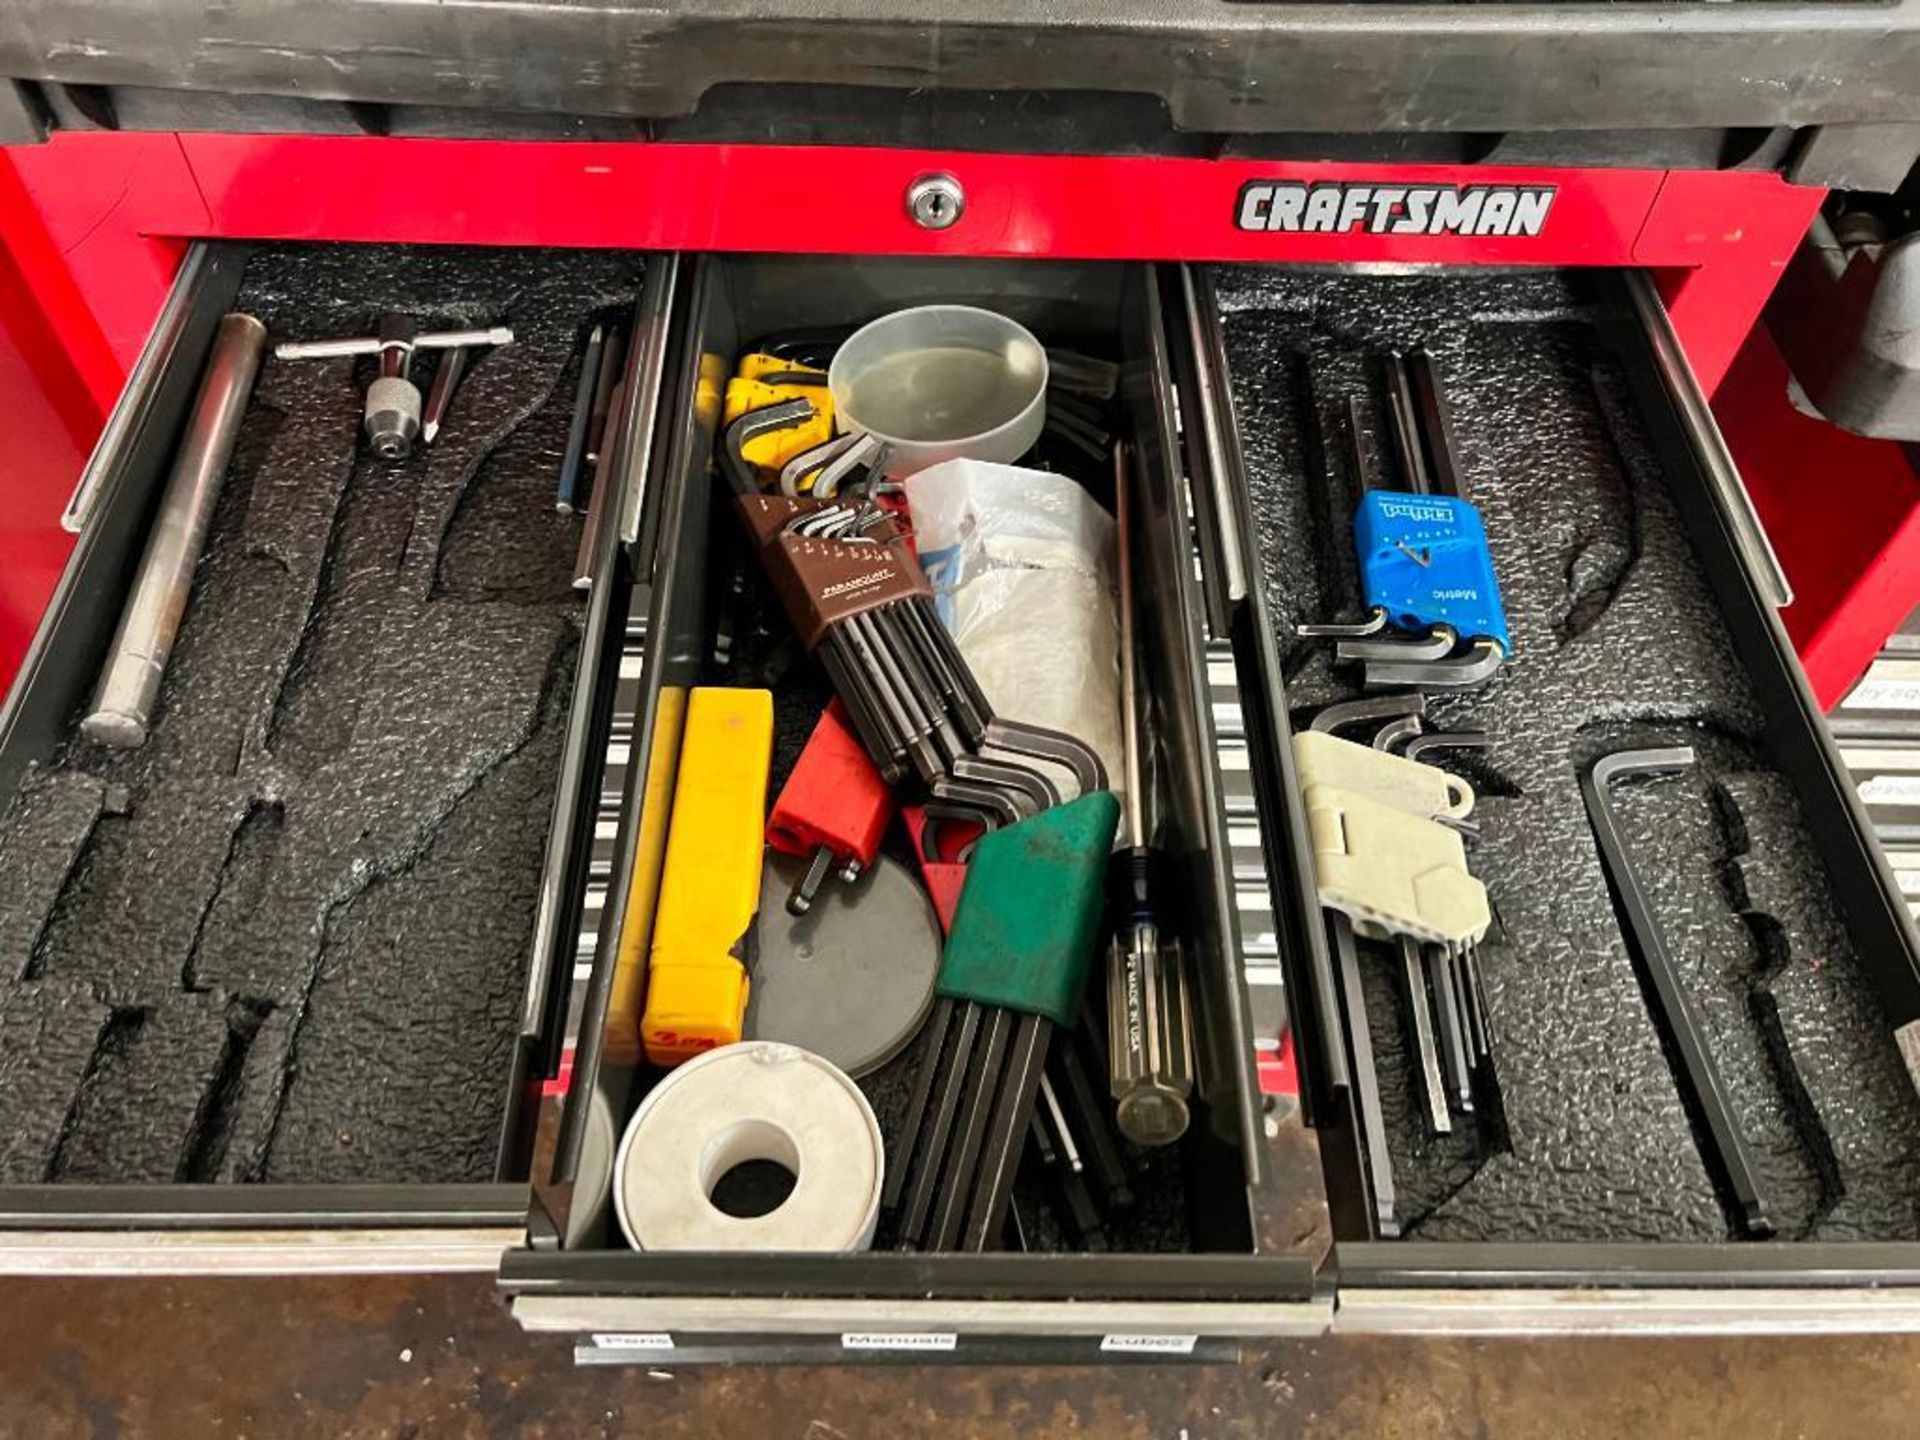 Craftsman 12-Drawer Rolling Toolbox w/ Content of Assorted Tools - Image 3 of 11